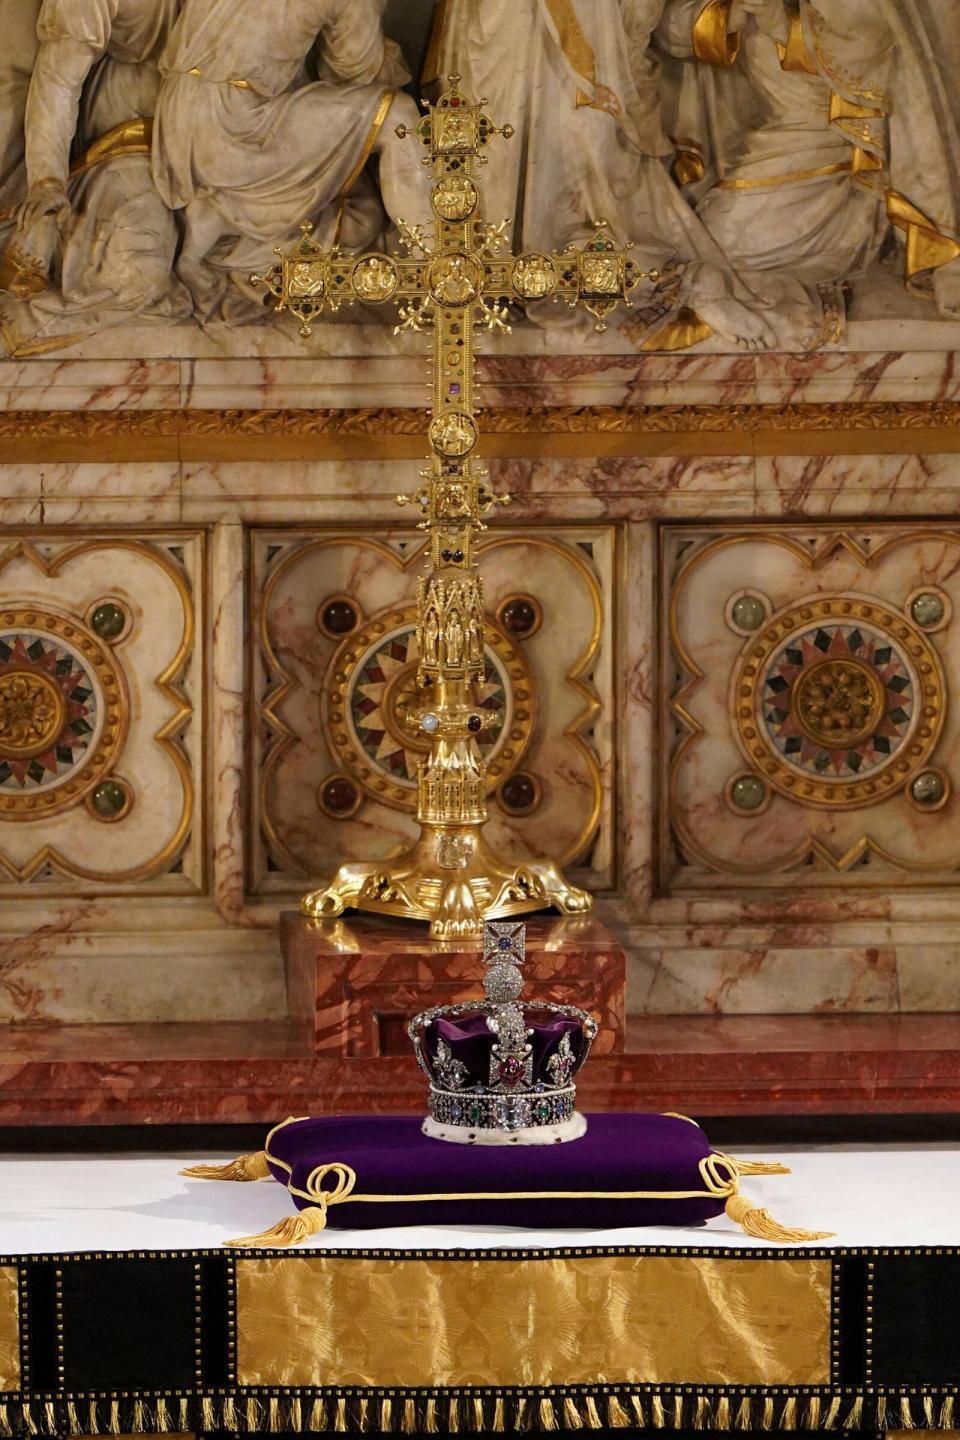 The Imperial State Crown rests on the high altar after being removed from the coffin of Queen Elizabeth II during a committal service at St. George's Chapel.